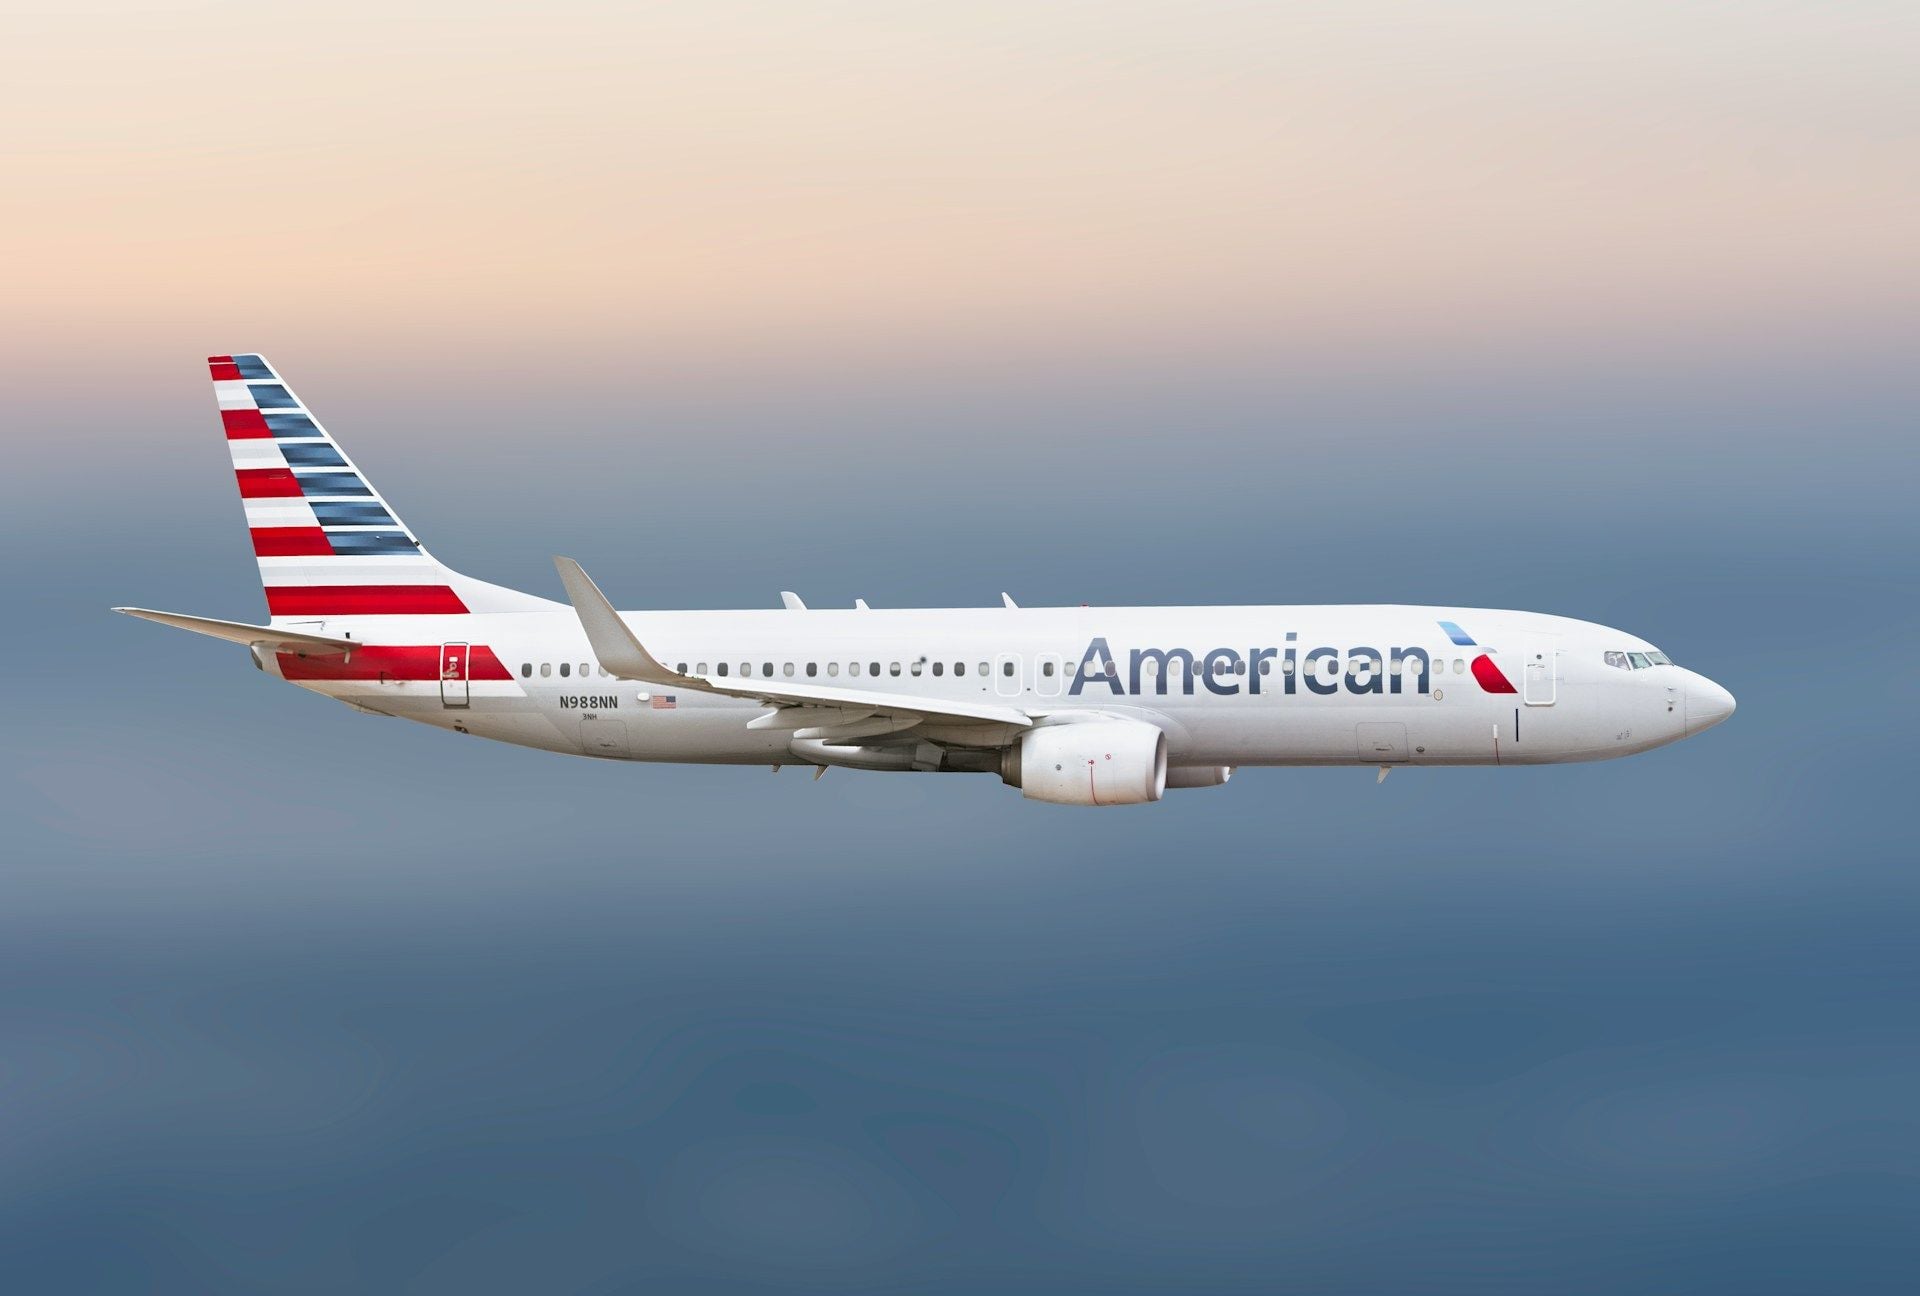 American Airlines Grows Fleet with Order of 260 Aircraft